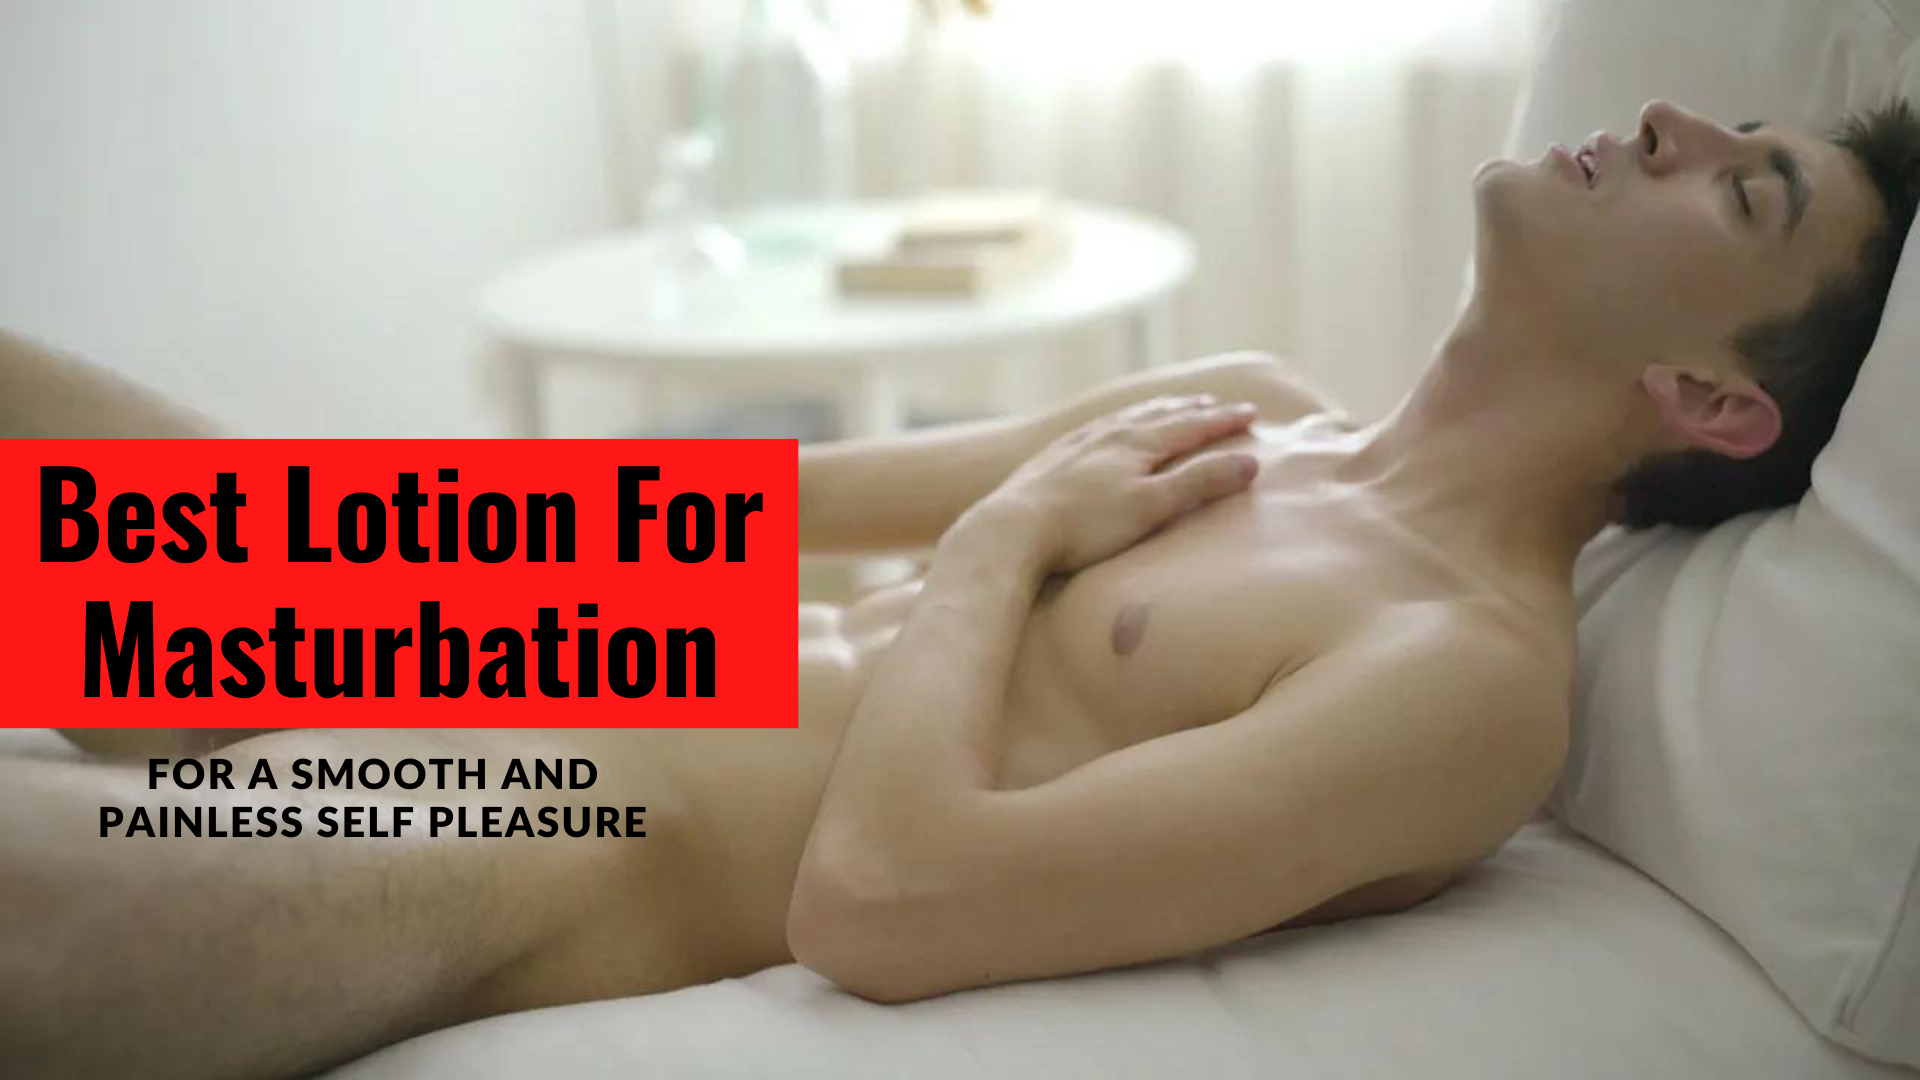 Best Lotion For Masturbation For A Smooth And Painless Self Pleasure